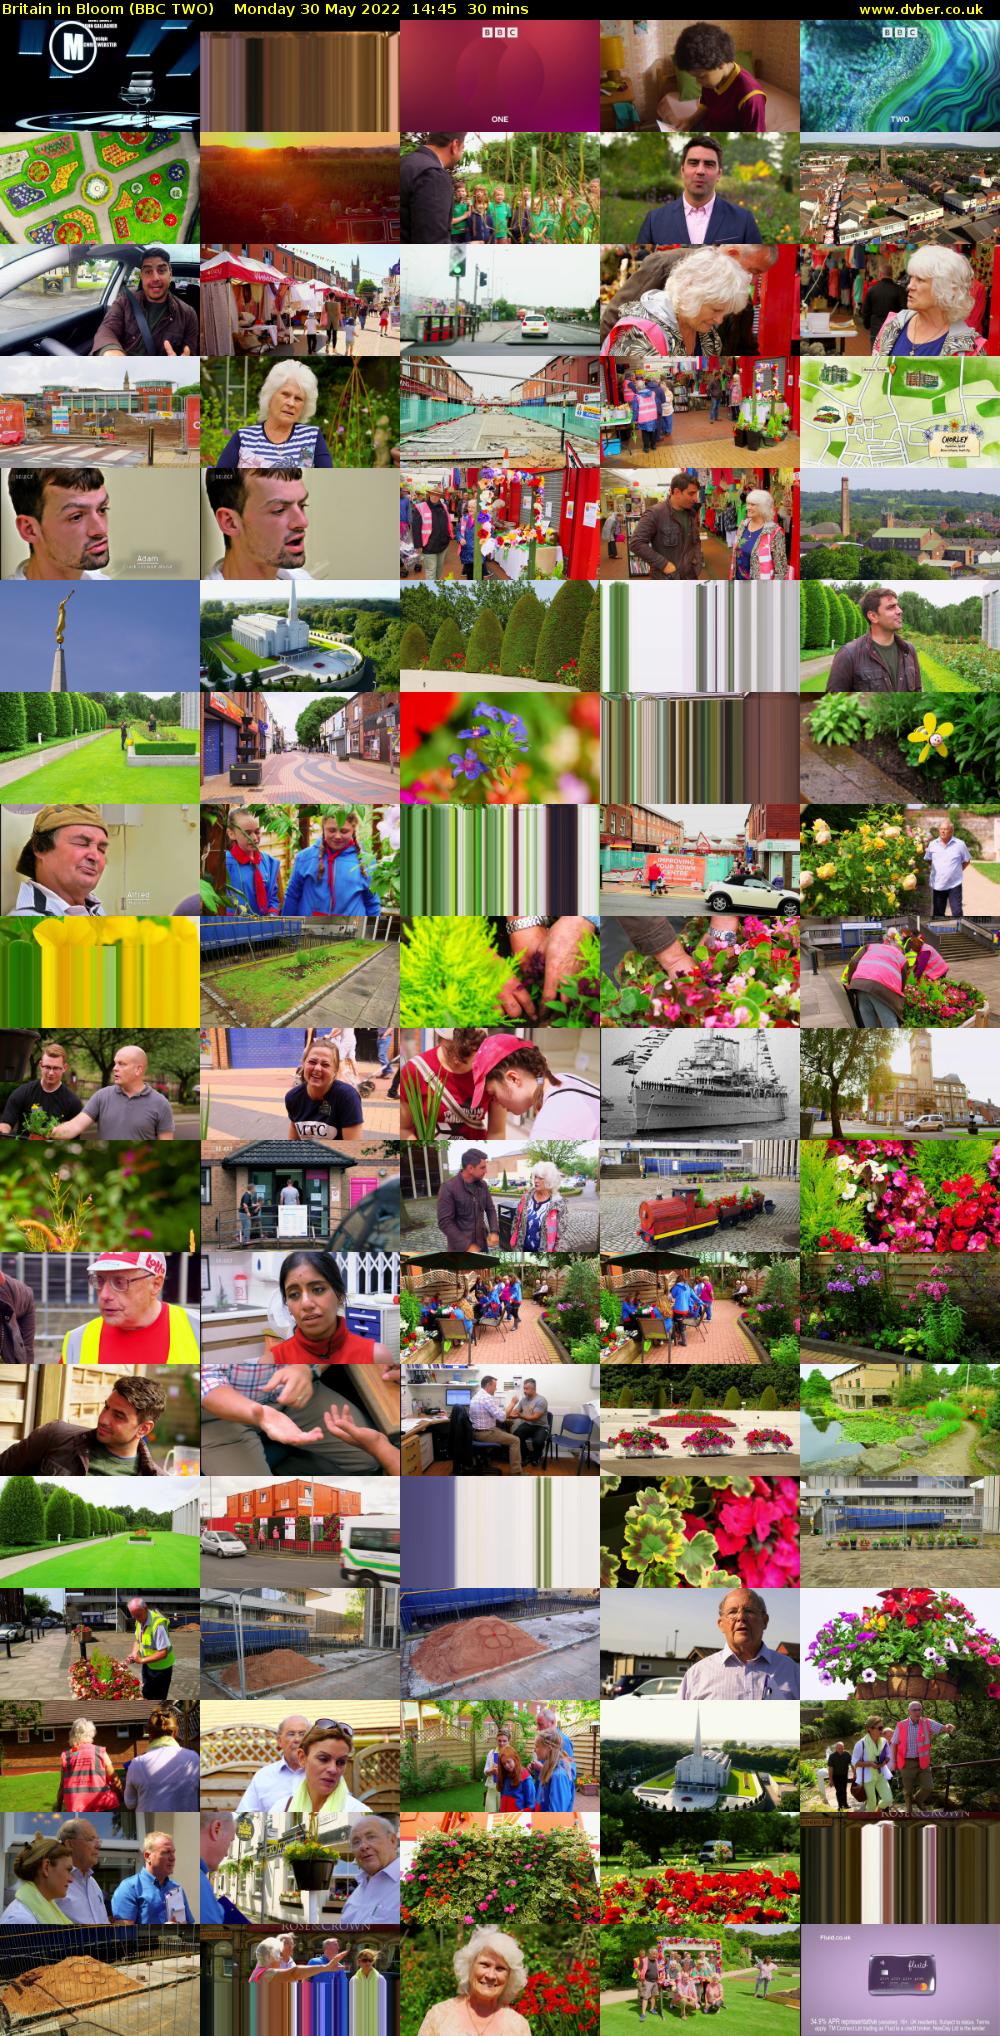 Britain in Bloom (BBC TWO) Monday 30 May 2022 14:45 - 15:15